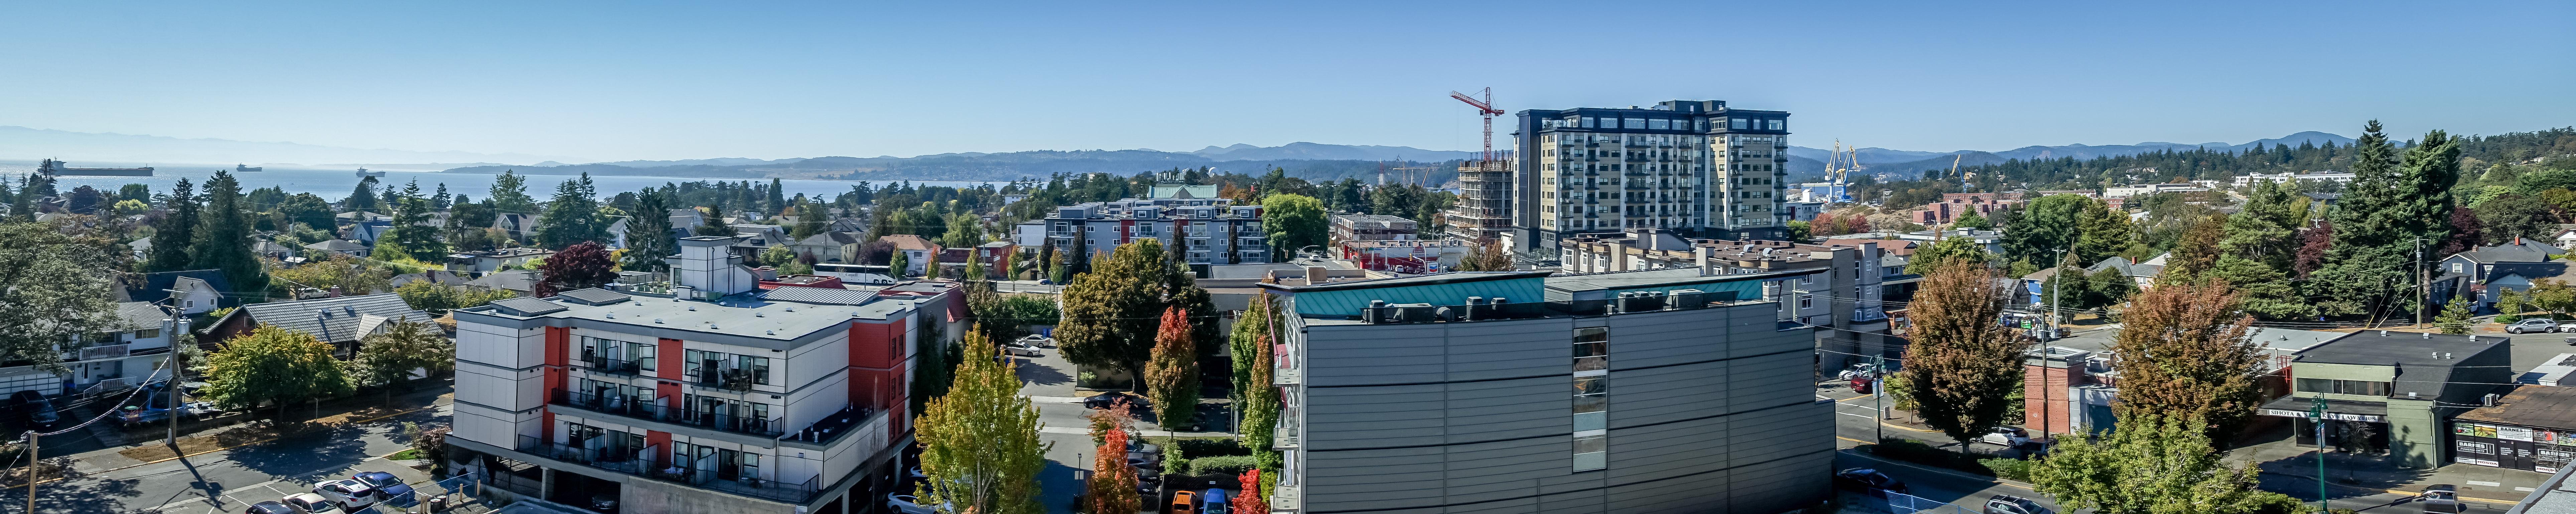 Esquimalt buildings with the ocean in the background in a panoramic shot.